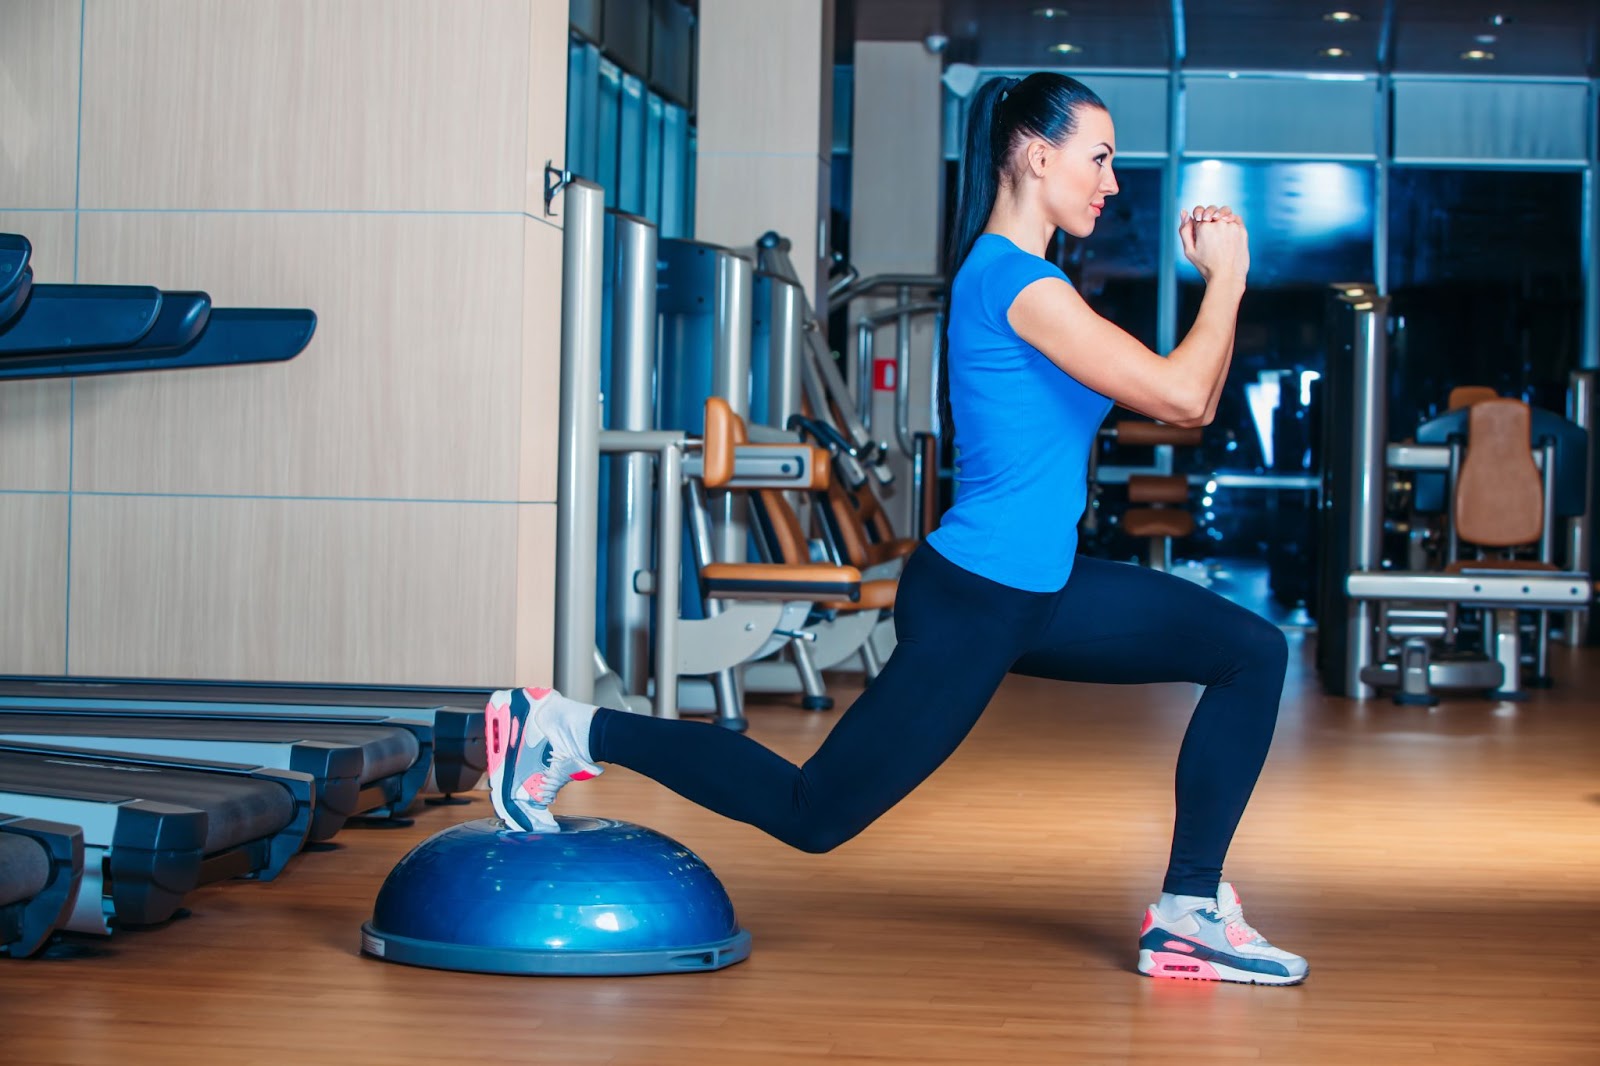 Fit woman going down in a lunge position on her BOSU ball.